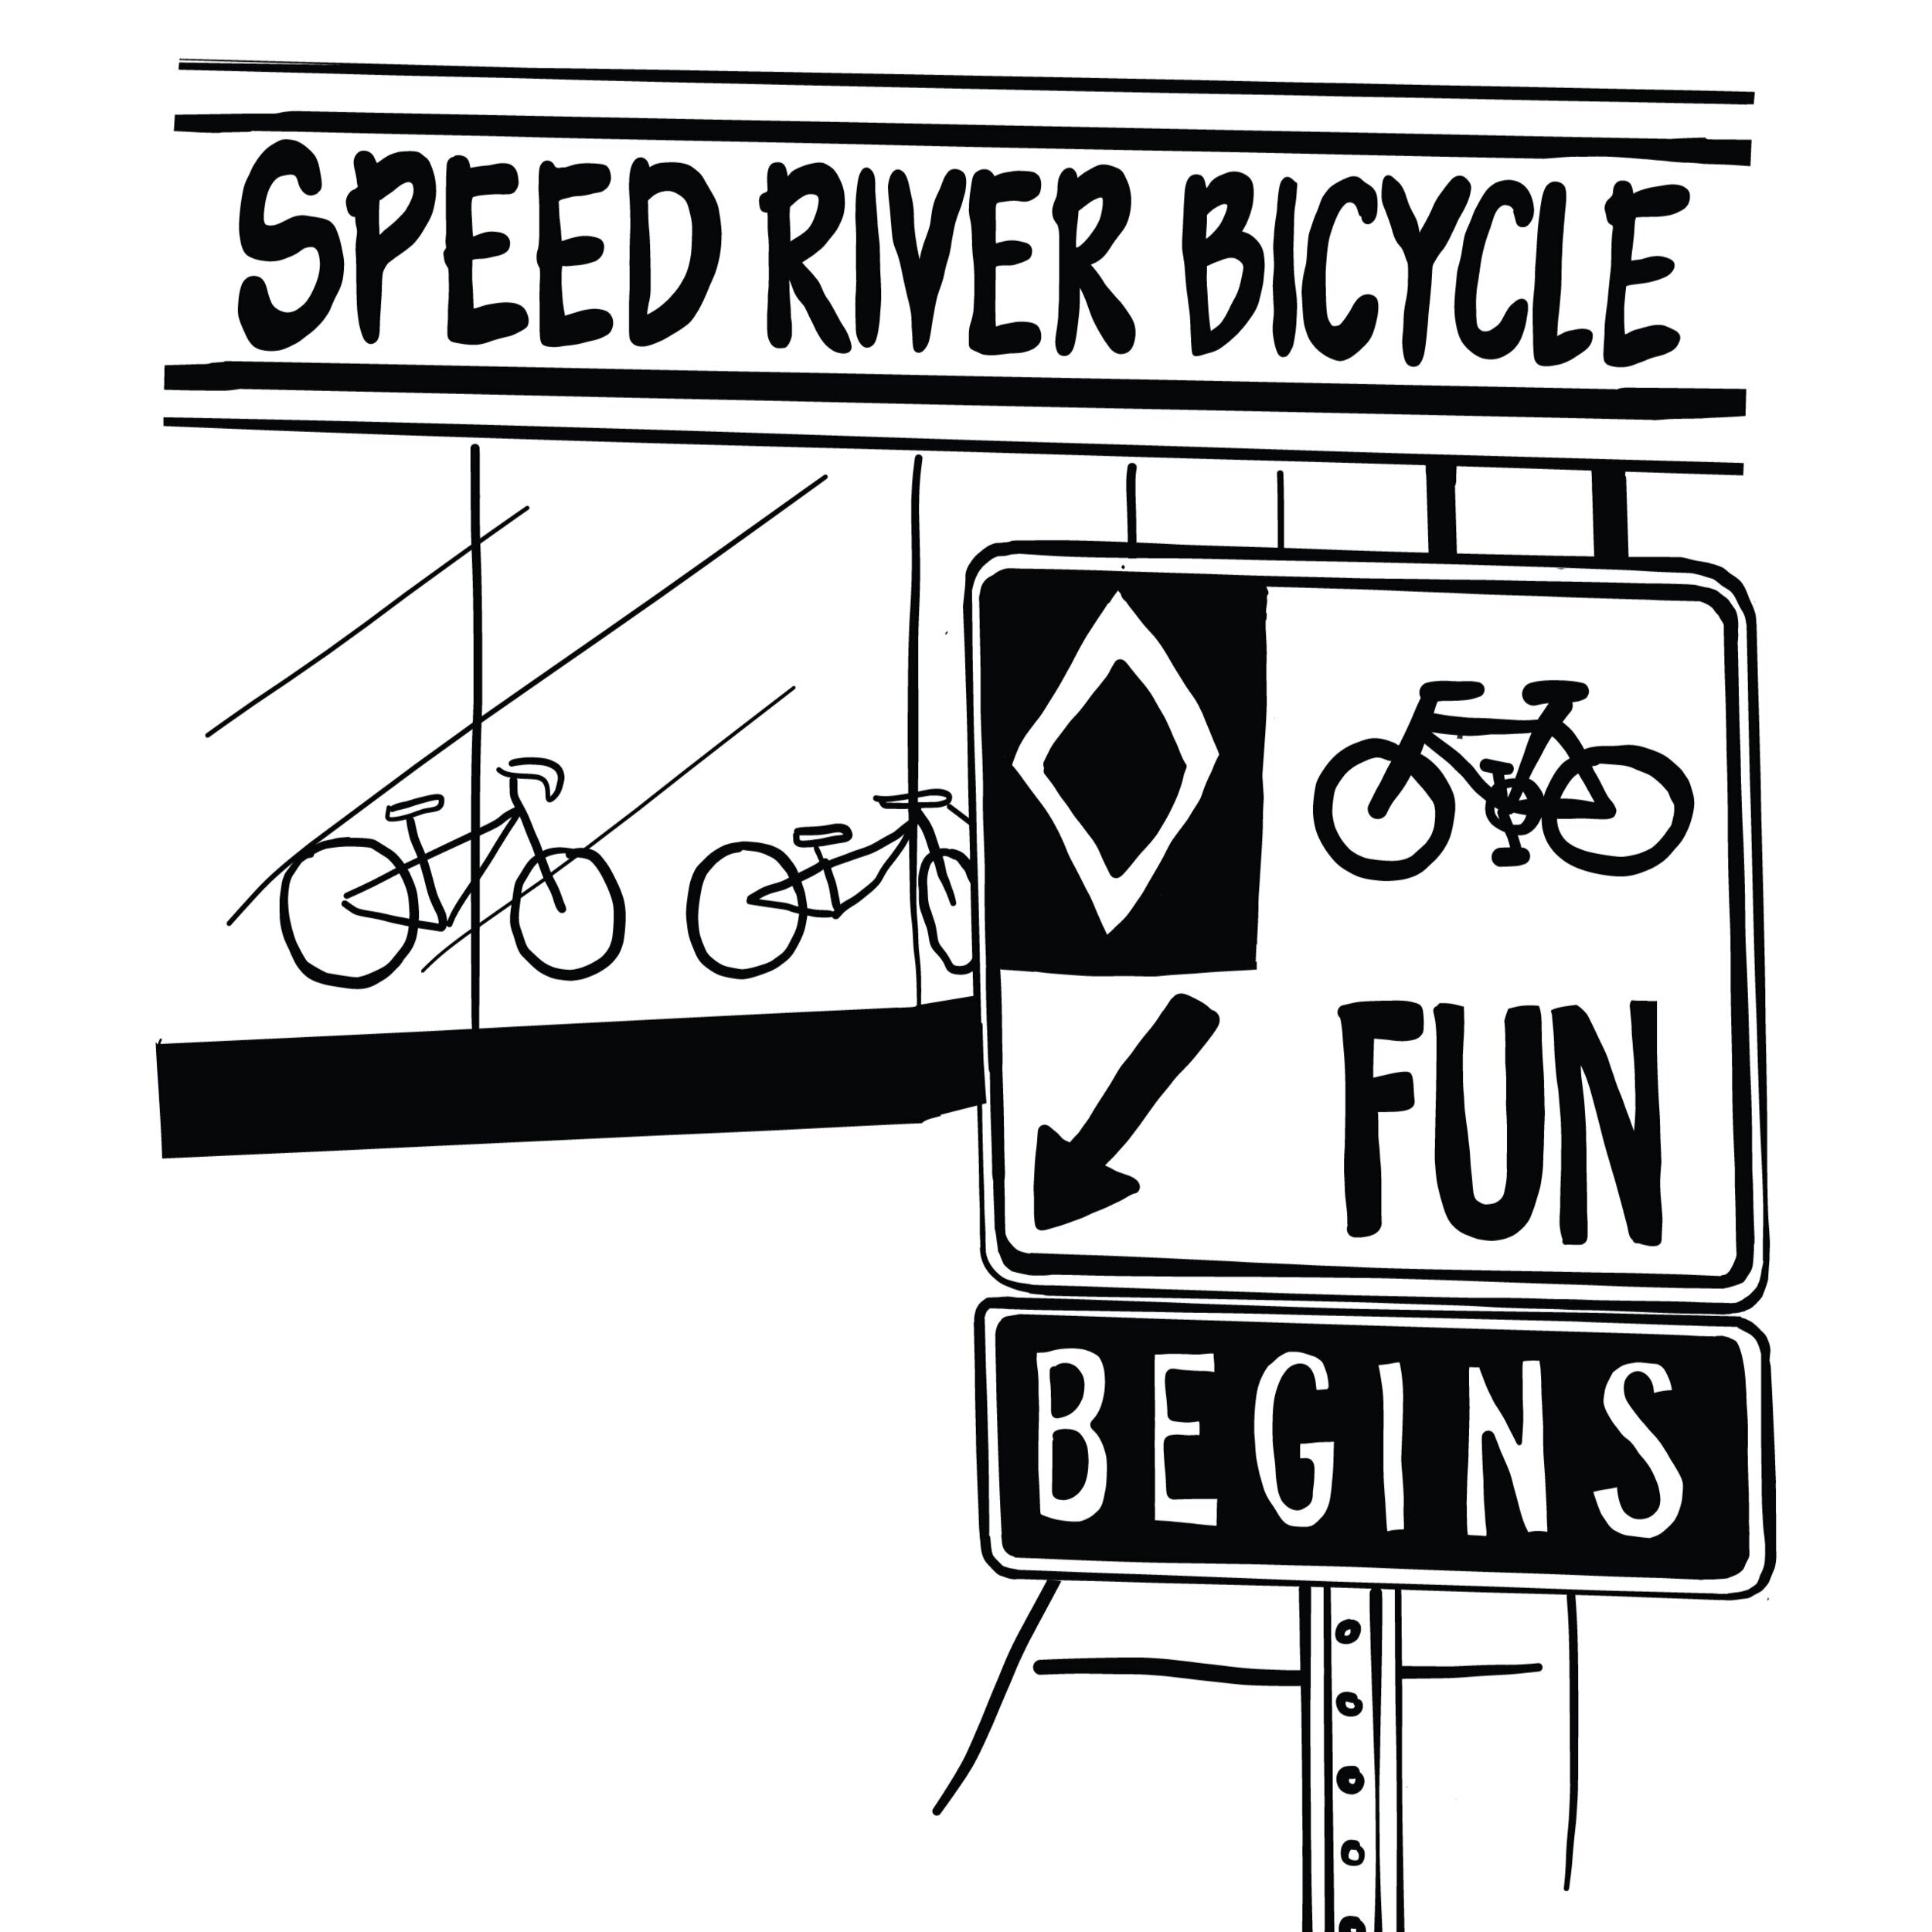 speed river bicycle